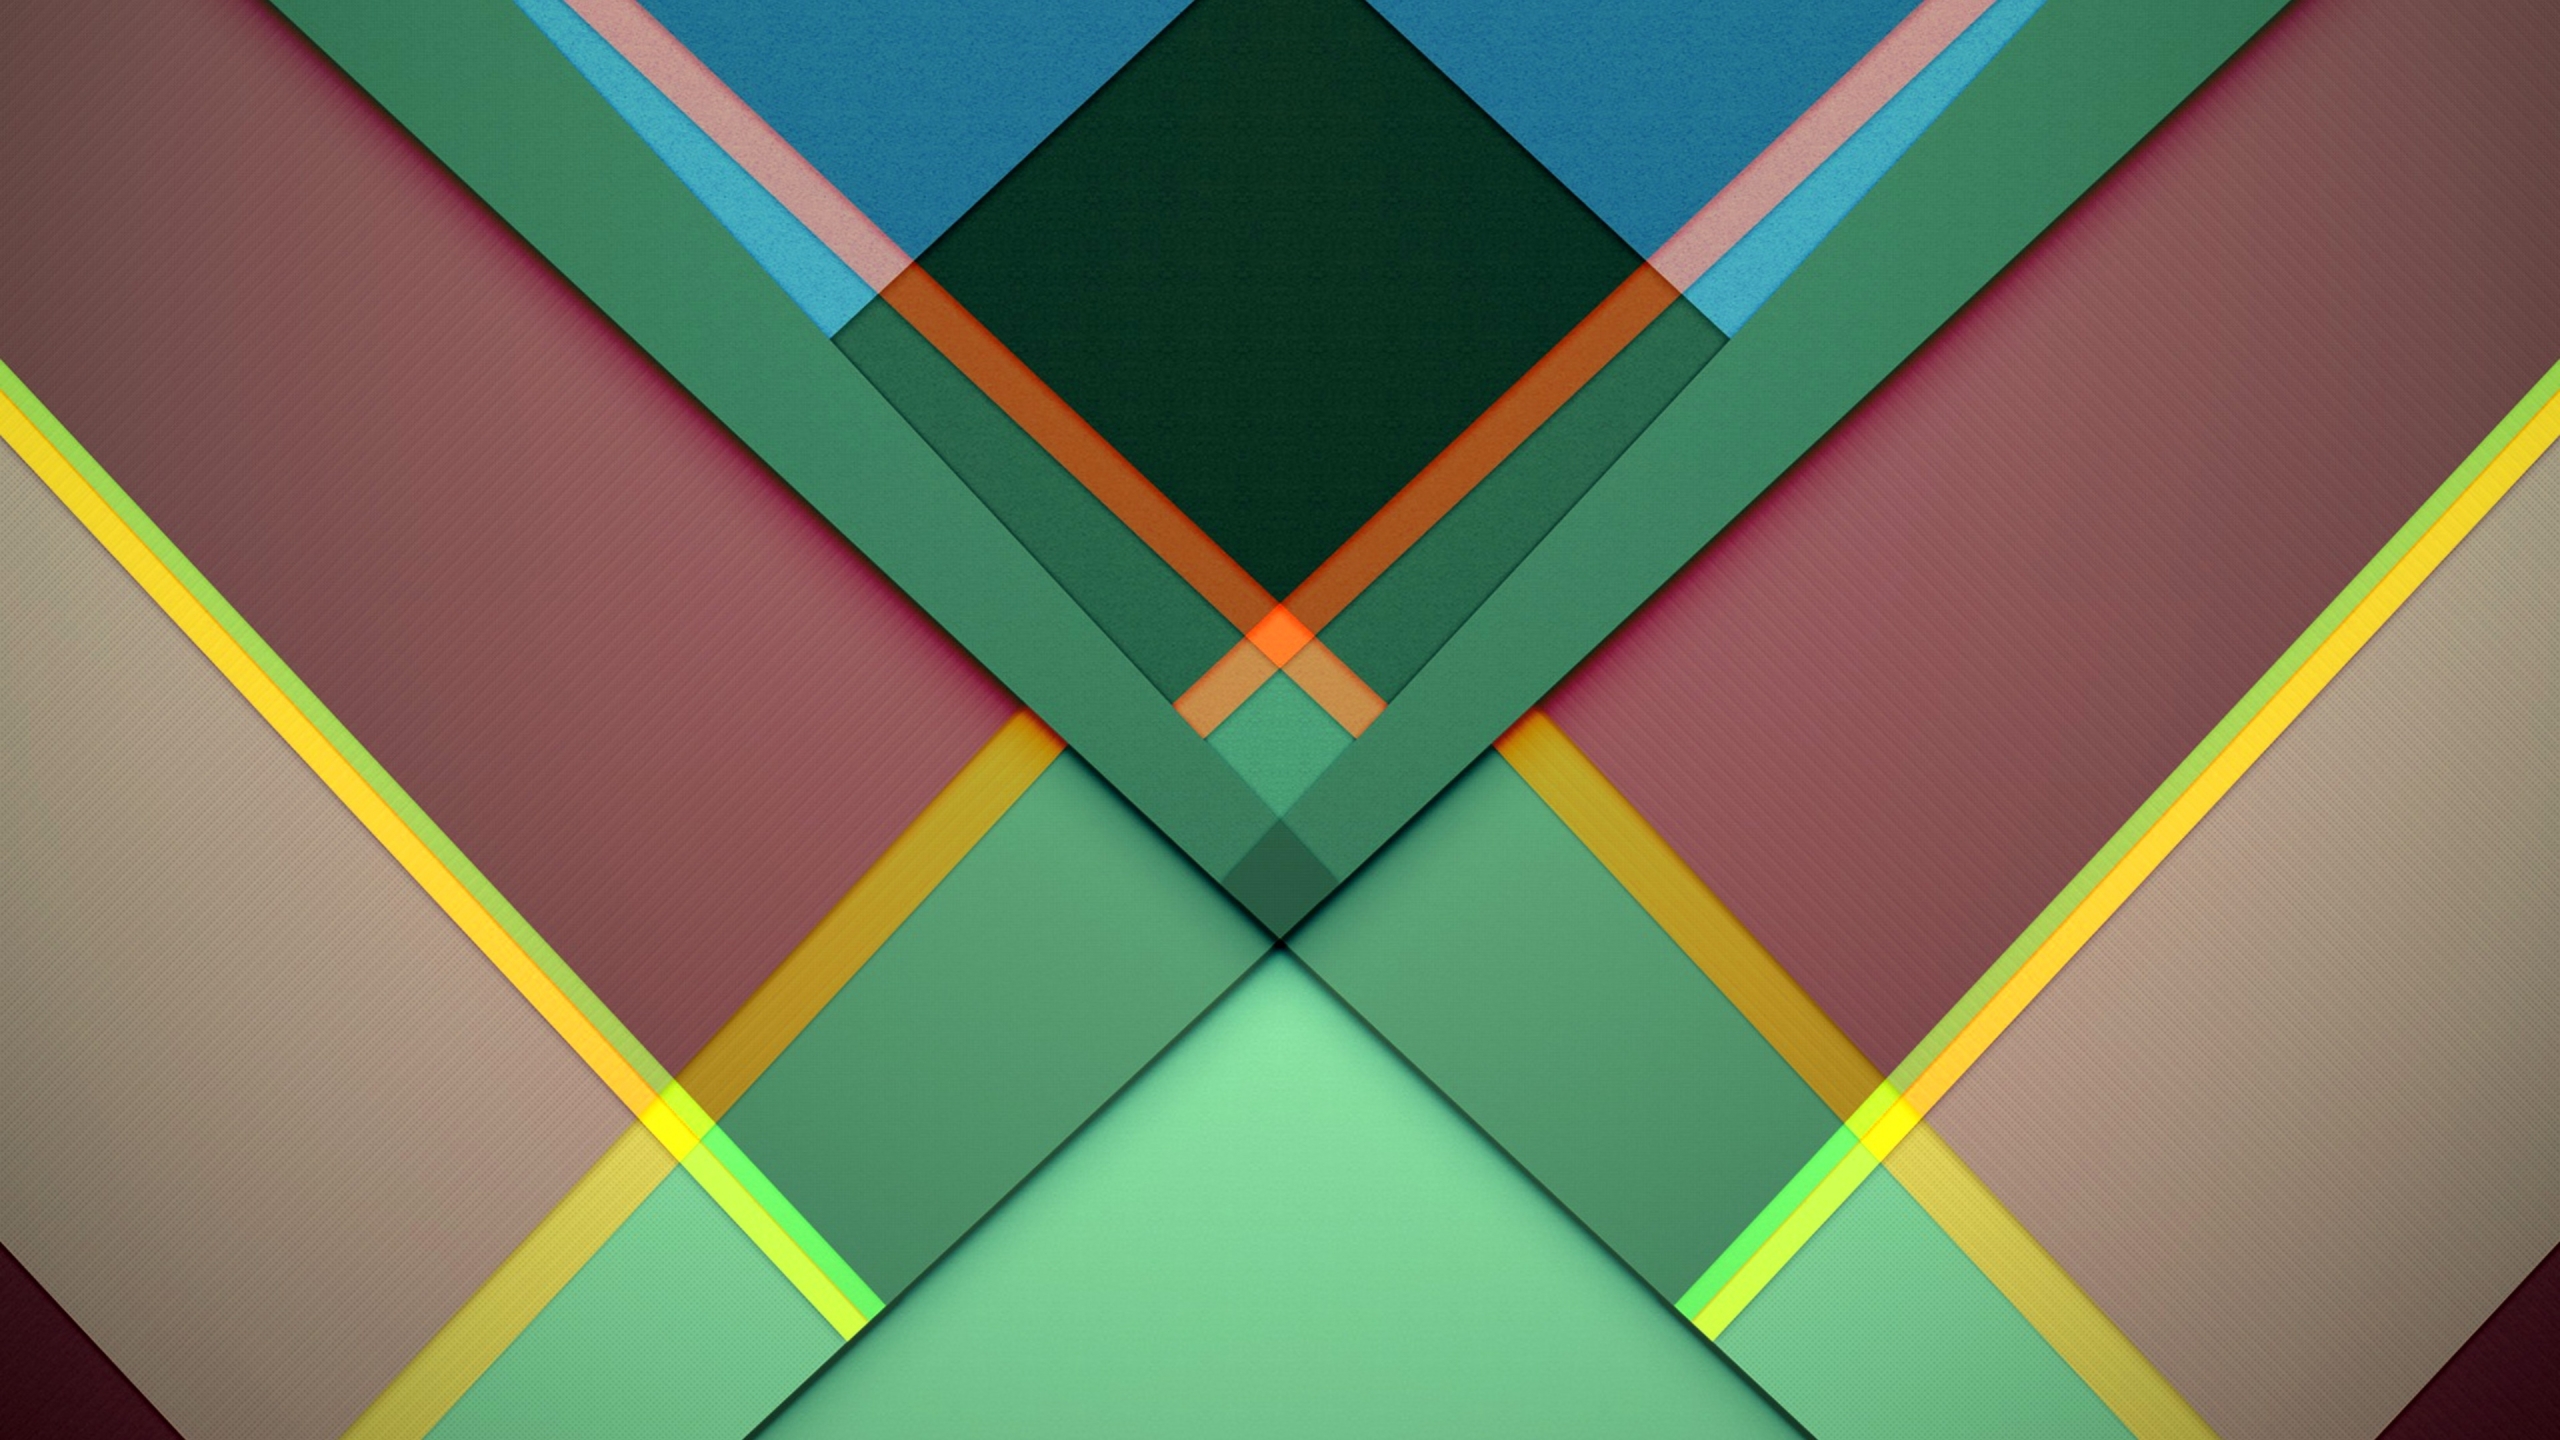 2560x1440 Resolution Geometry Abstract Lines 1440P Resolution Wallpaper